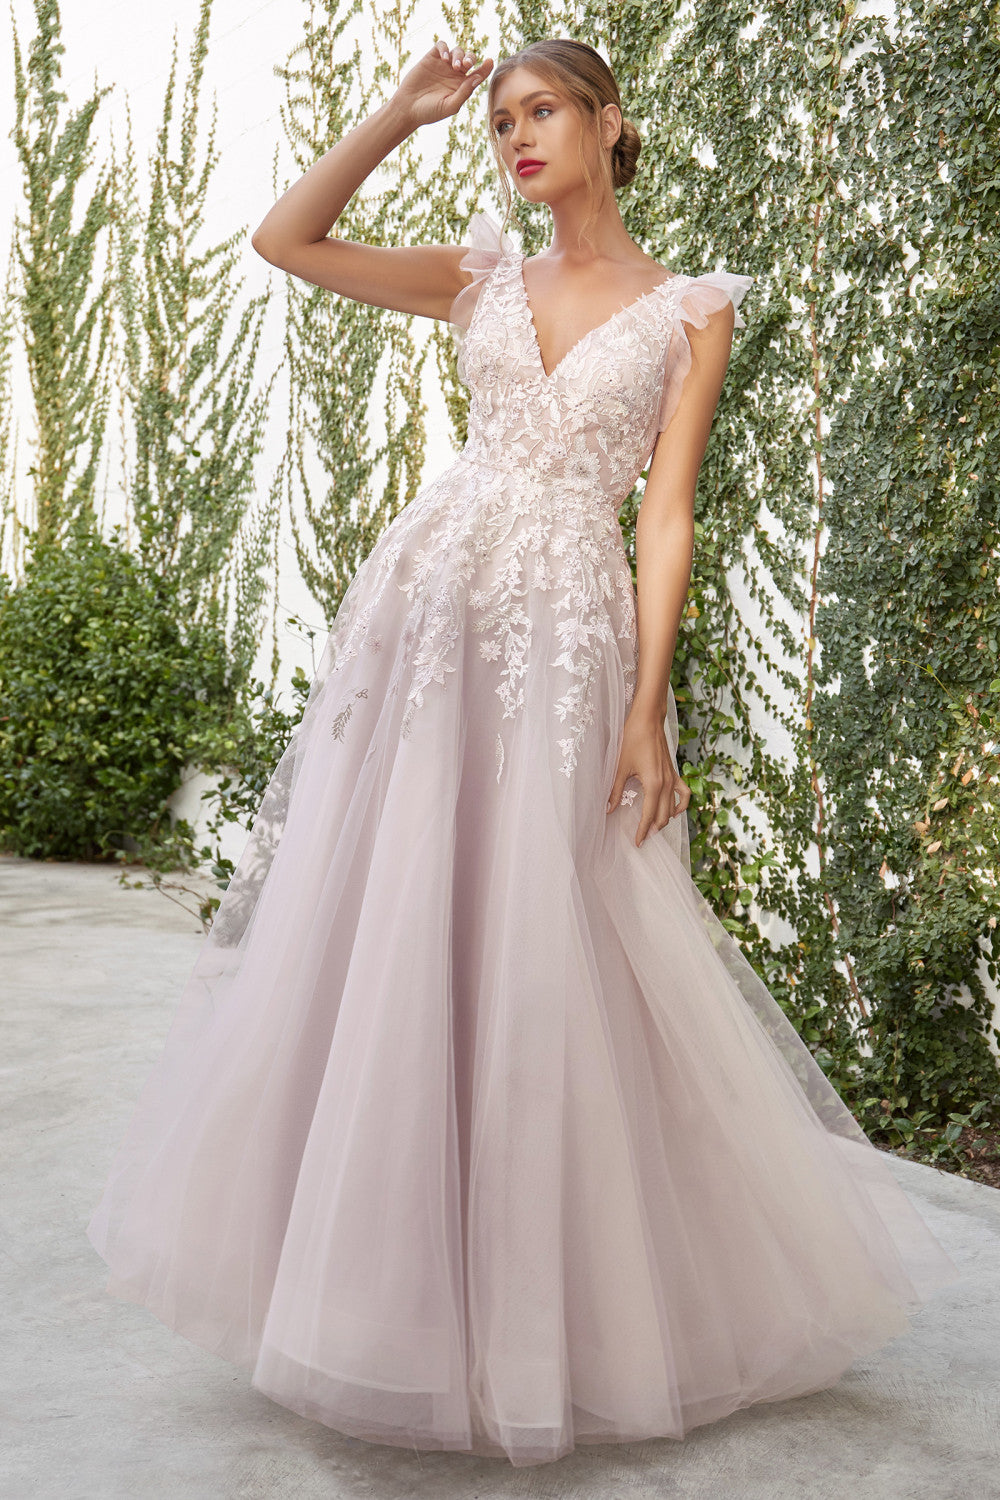 Flutter Tulle Sleeve Floral A-Line Gown by Andrea & Leo Couture A1018 Lennox - Special Occasion